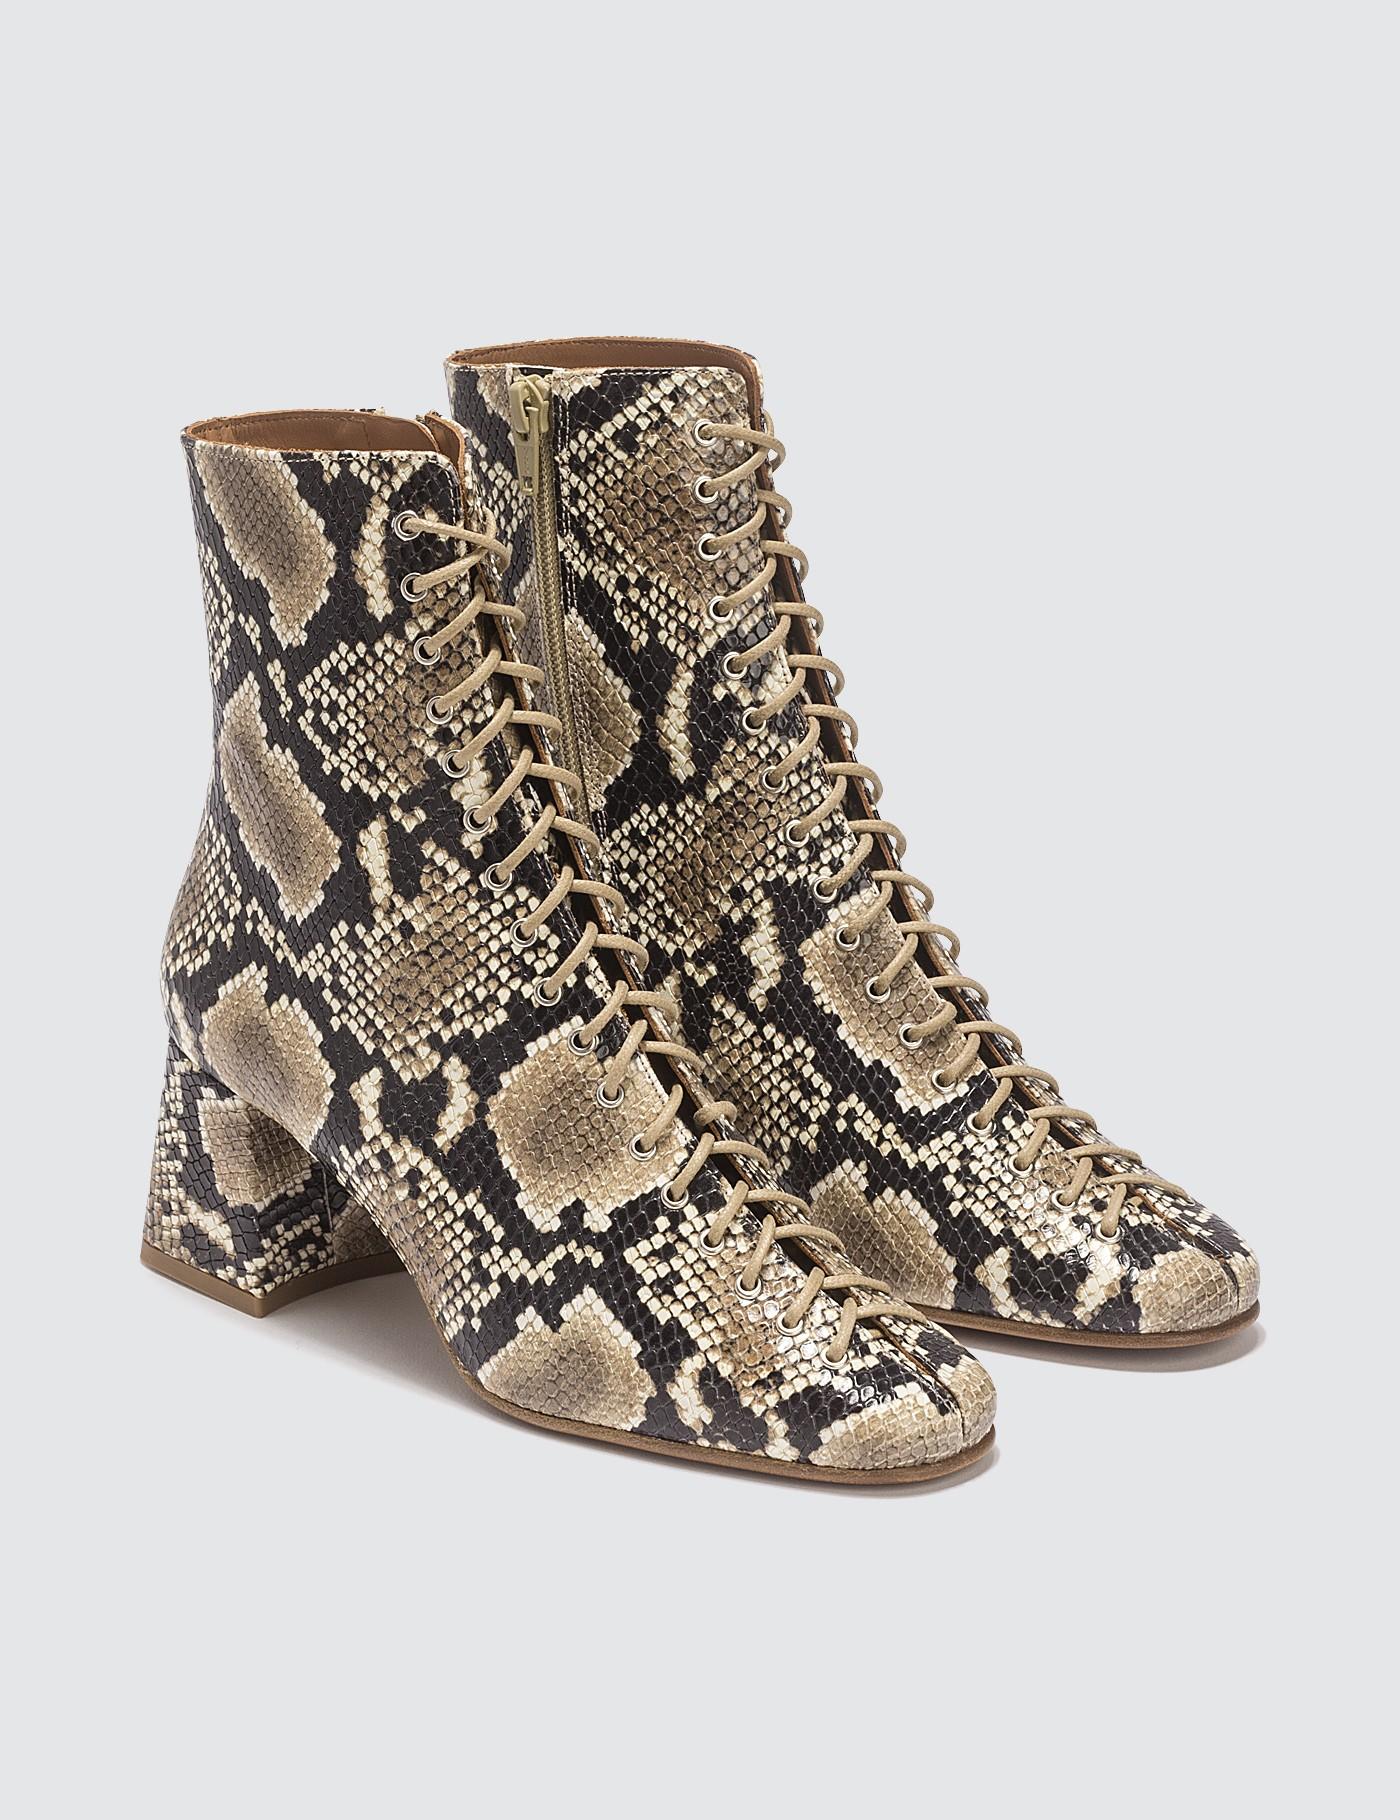 BY FAR Becca Snake Print Leather Boots - Lyst